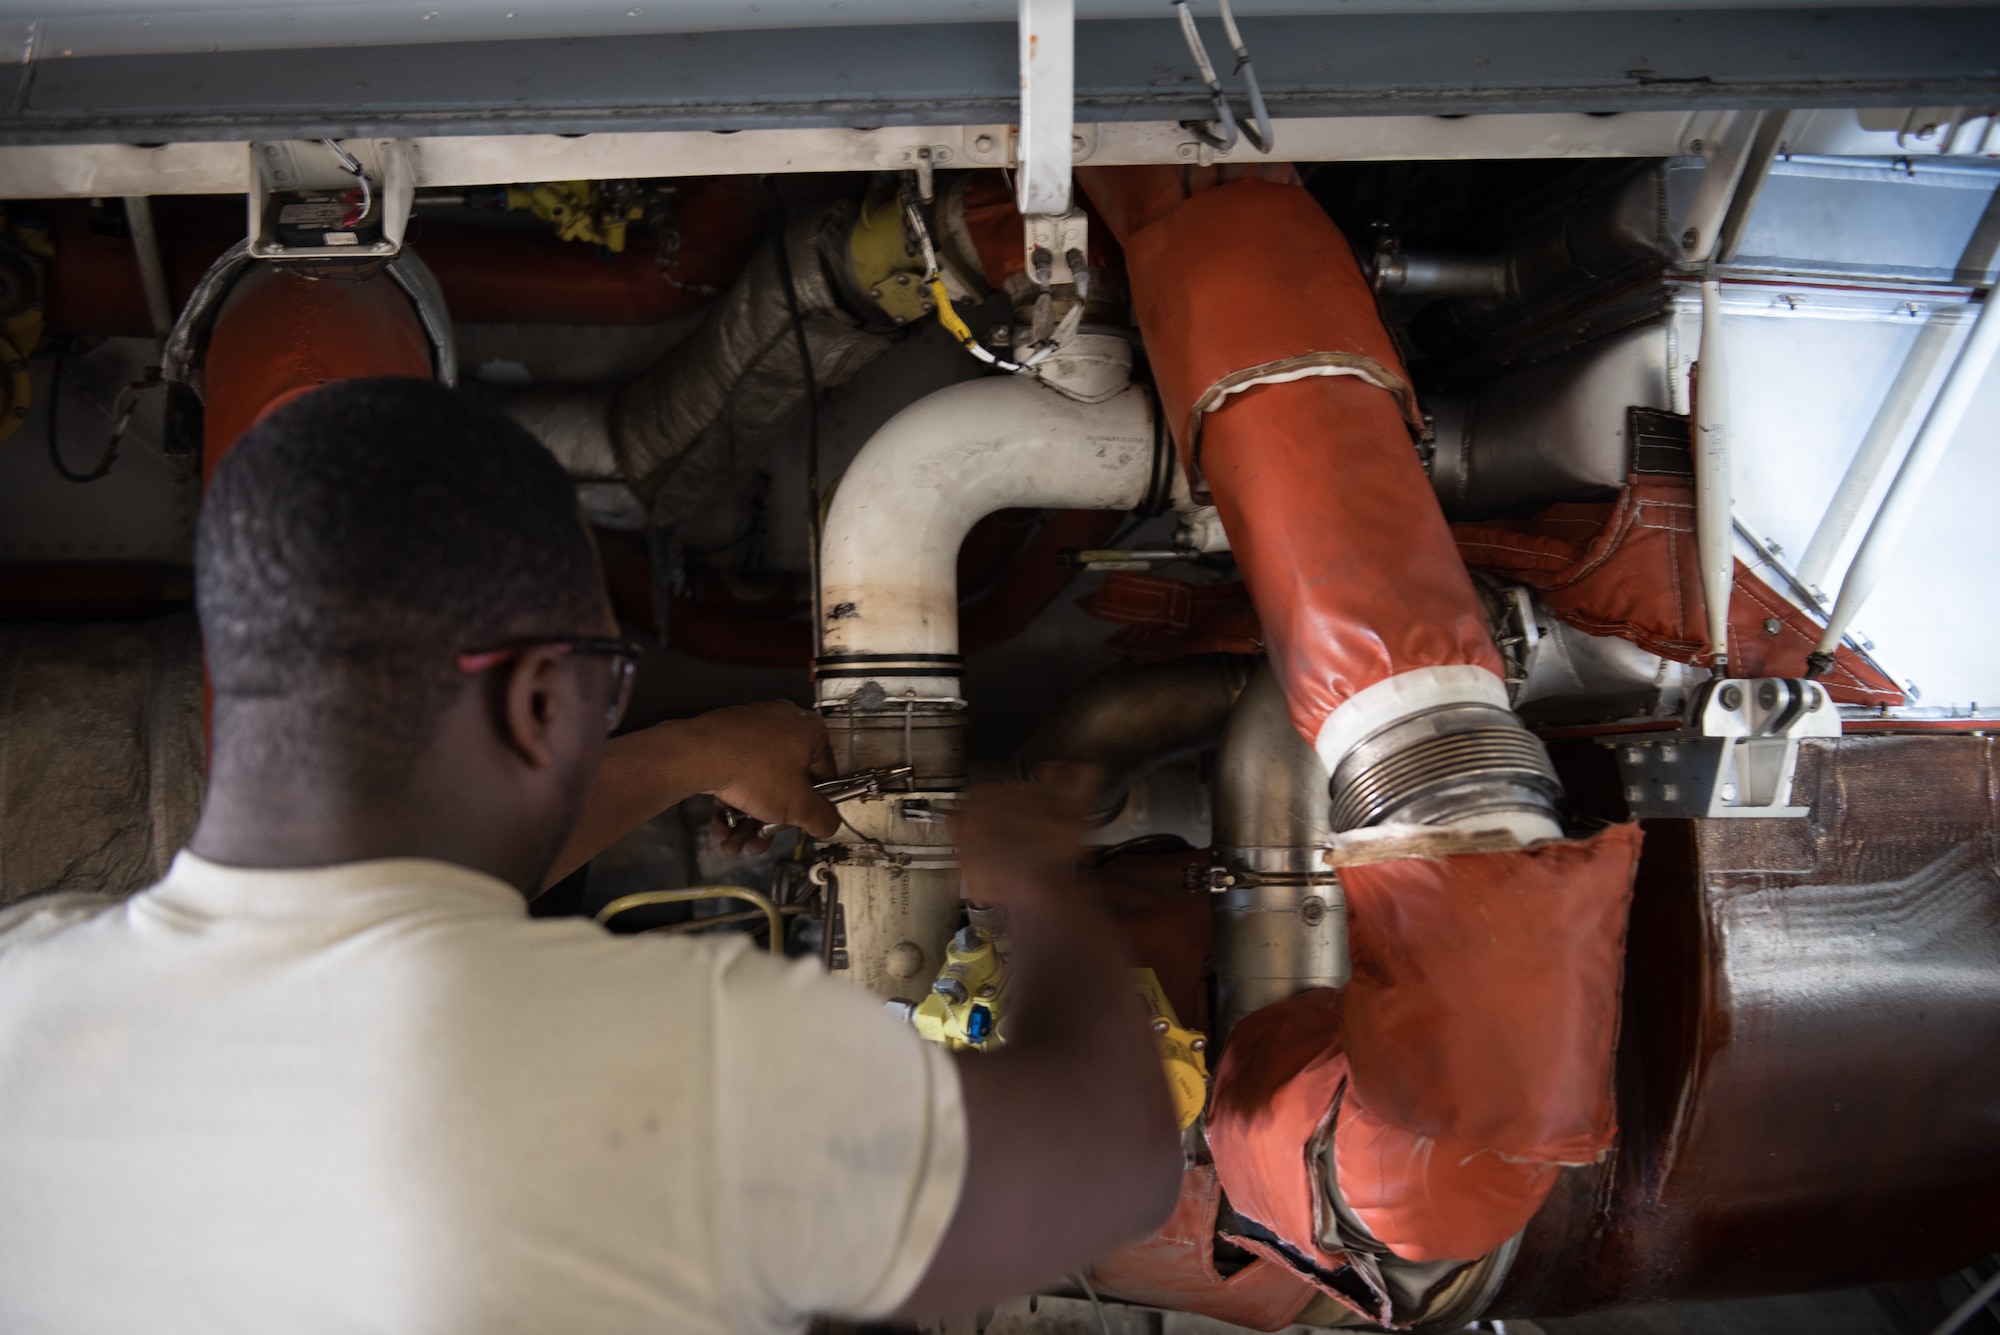 U.S. Air Force Airman 1st Class Leonard Howell, 62nd Maintenance Squadron electrical environmental apprentice, performs maintenance on the cooling system of a C-17 Globemaster III June 3, 2019, at Travis Air Force Base, California. Airmen from Joint Base Lewis-McChord, Washington, and Travis have completed 18 C-17 inspections since February. (U.S. Air Force photo by Tech. Sgt. James Hodgman)